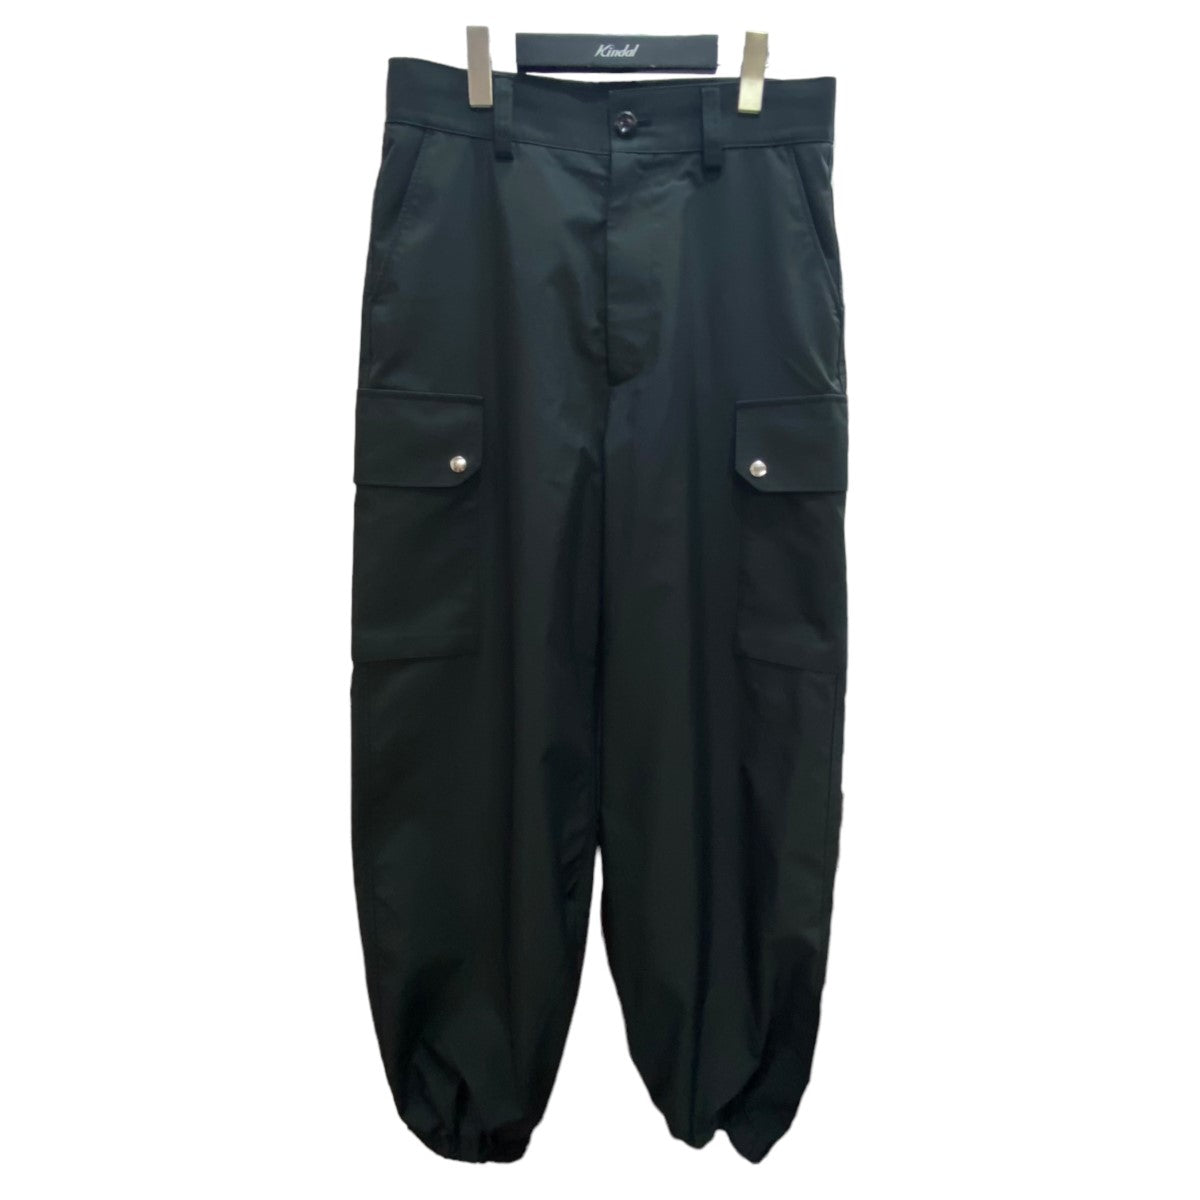 23SS｢FRENCH ARMY F2 CARGO PANTS｣カーゴパンツ